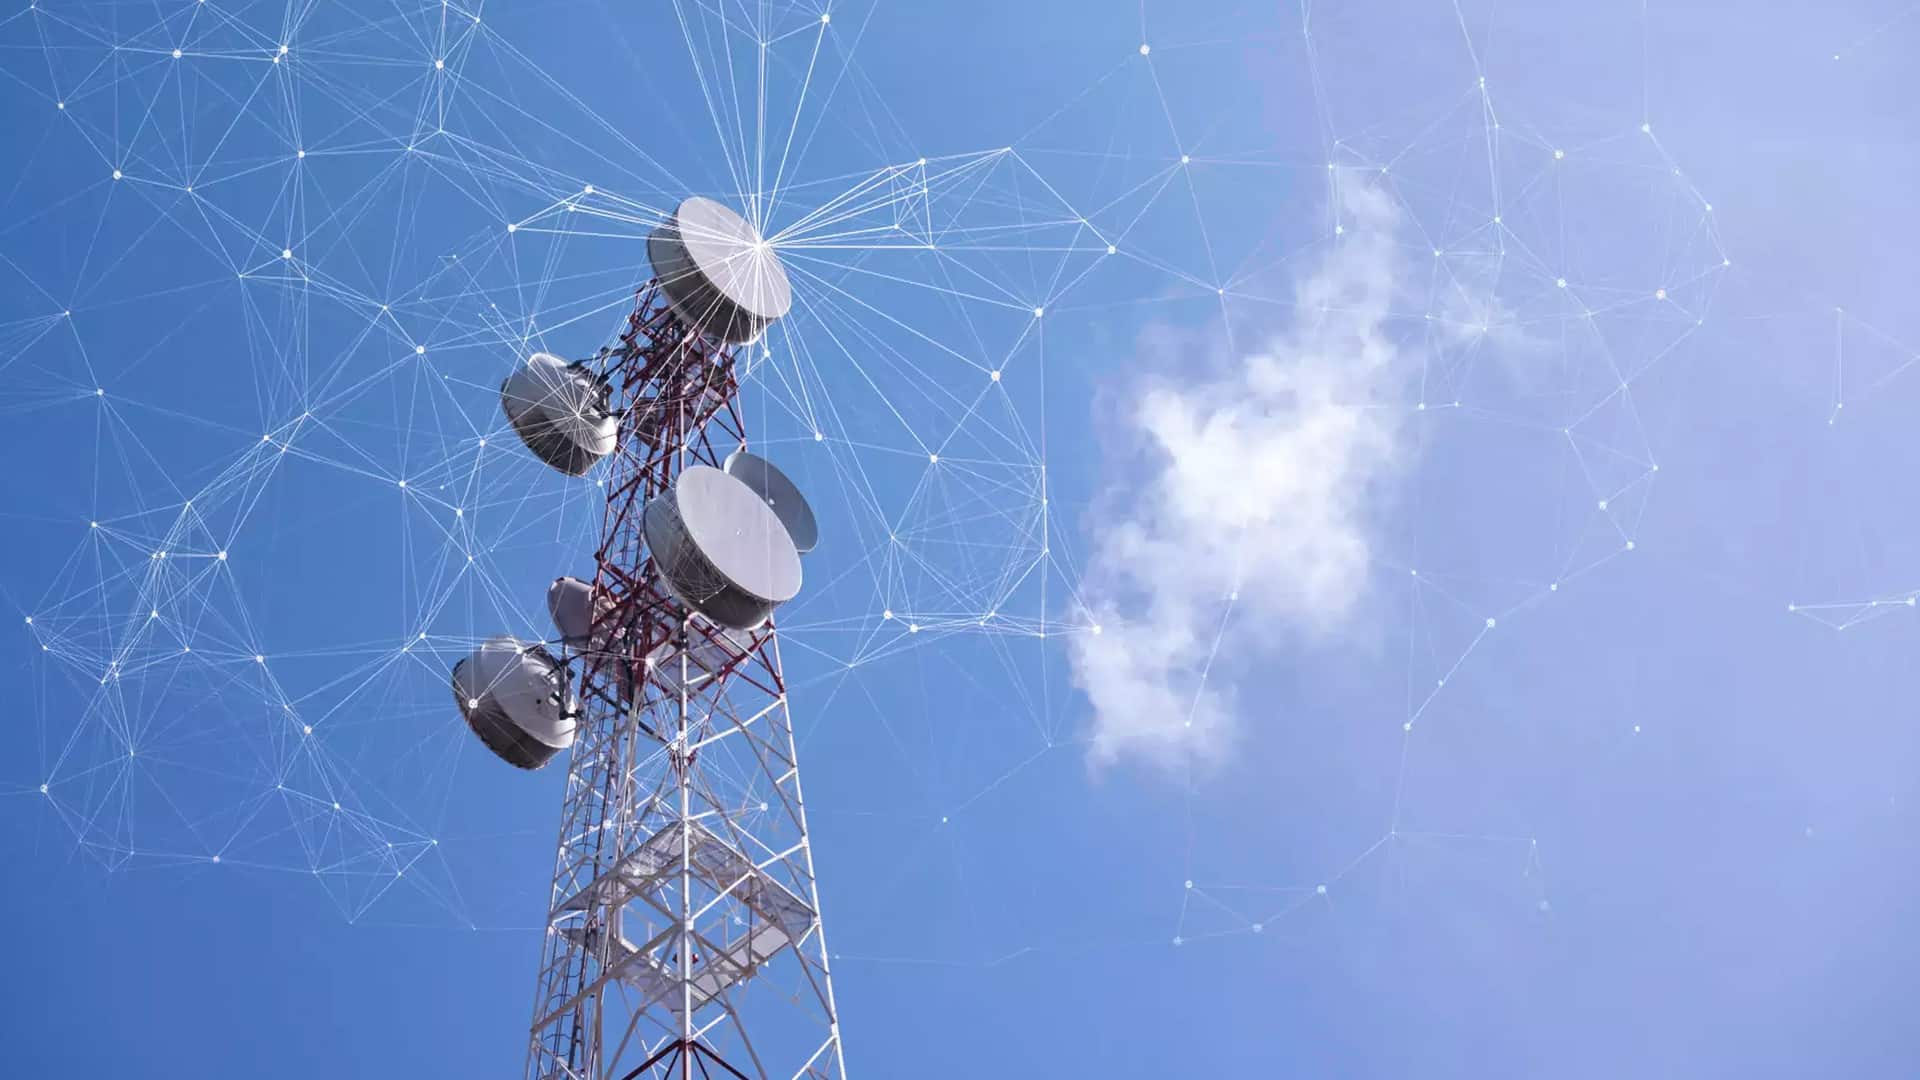 Indian telecom industry to grow by USD 12.5 bn every three years: Deloitte-CII report